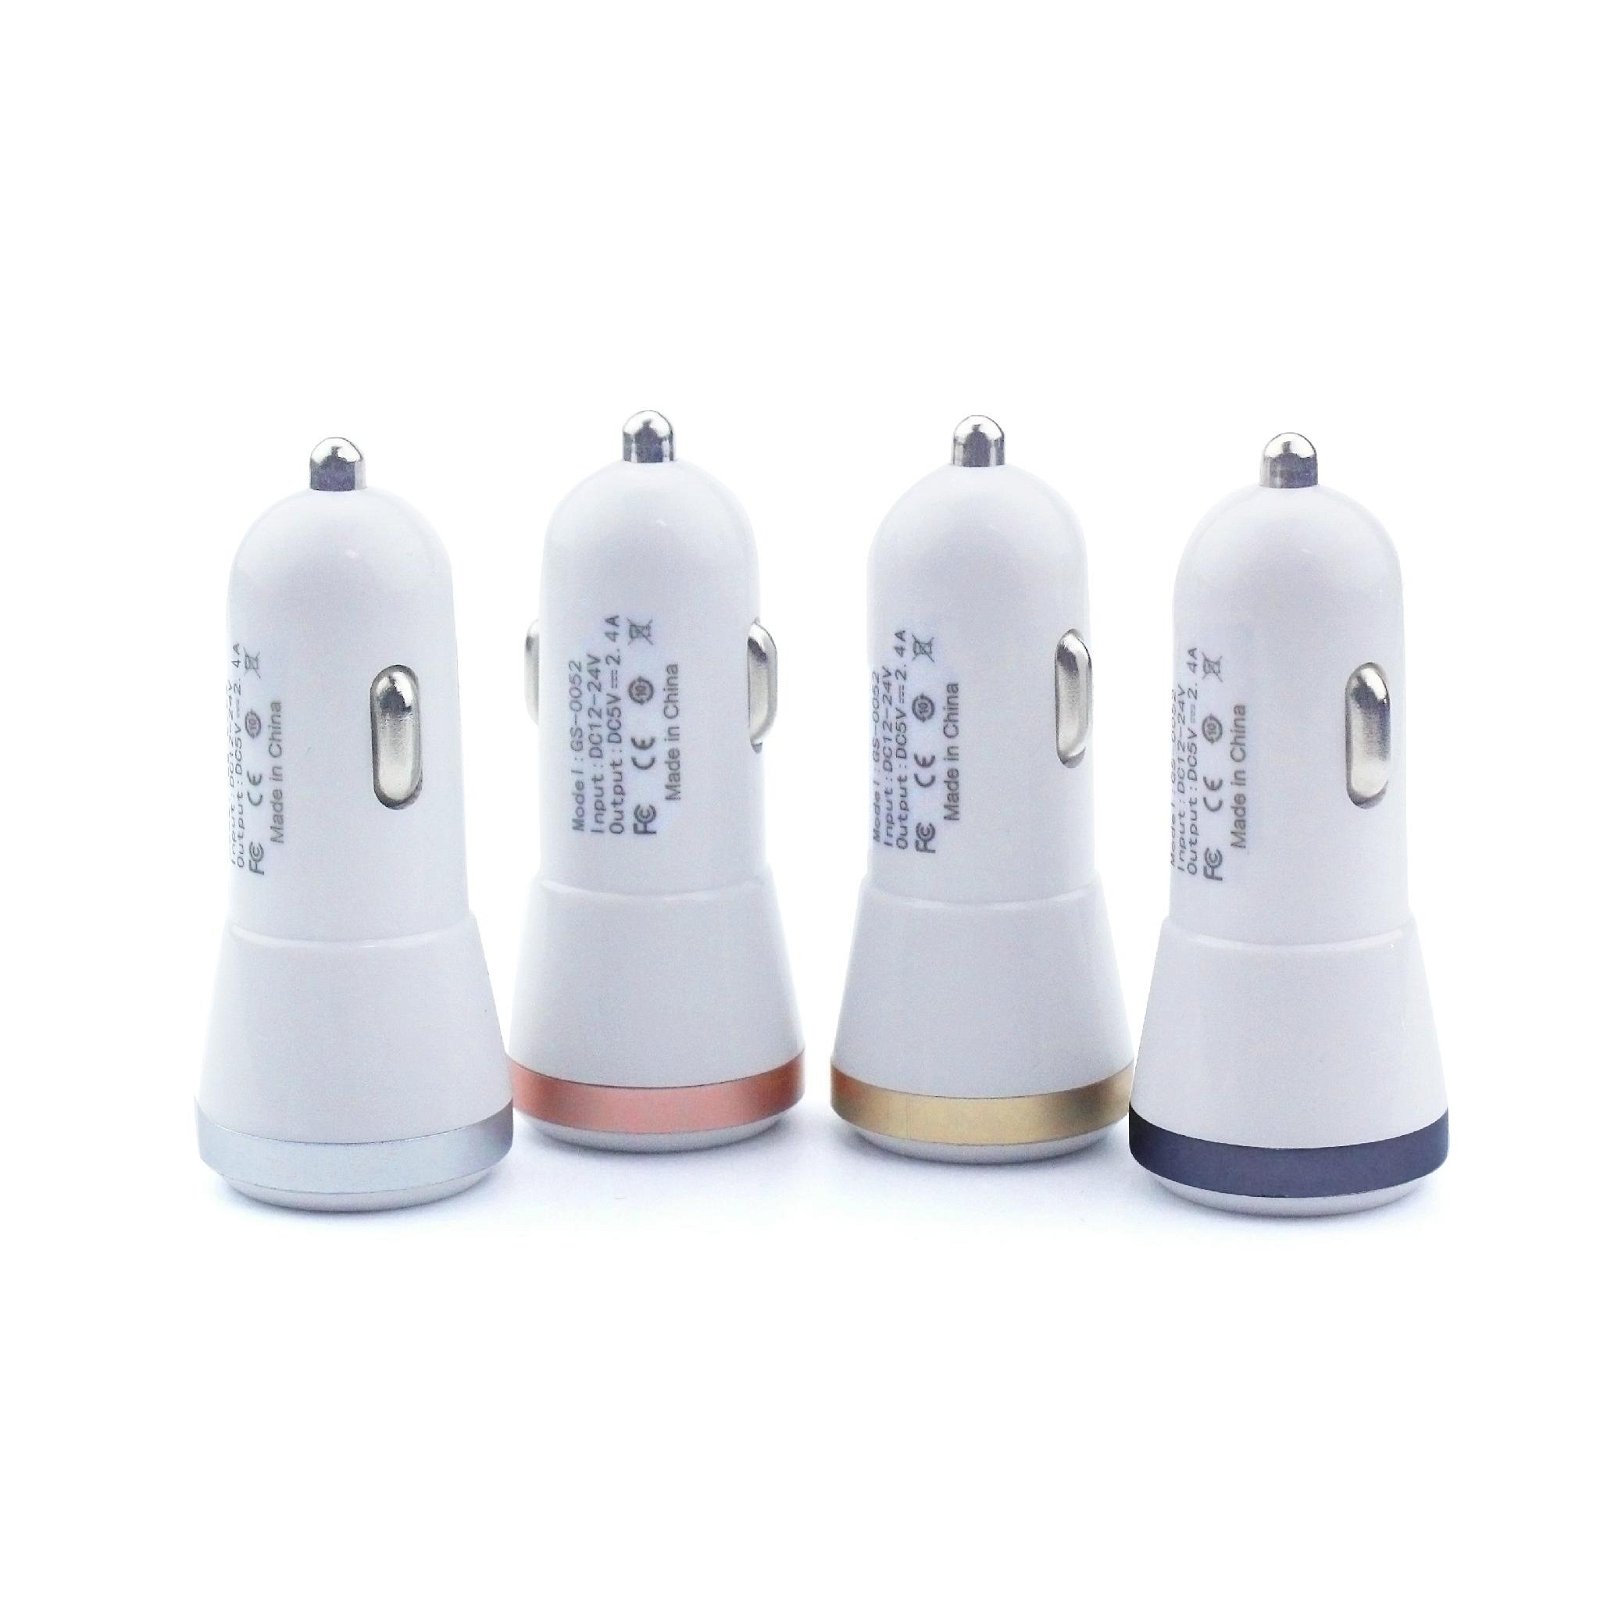 CE FCC ROHS Quality Mini USB Car Charger Portable Dual USB Mobile Phone Charger 3